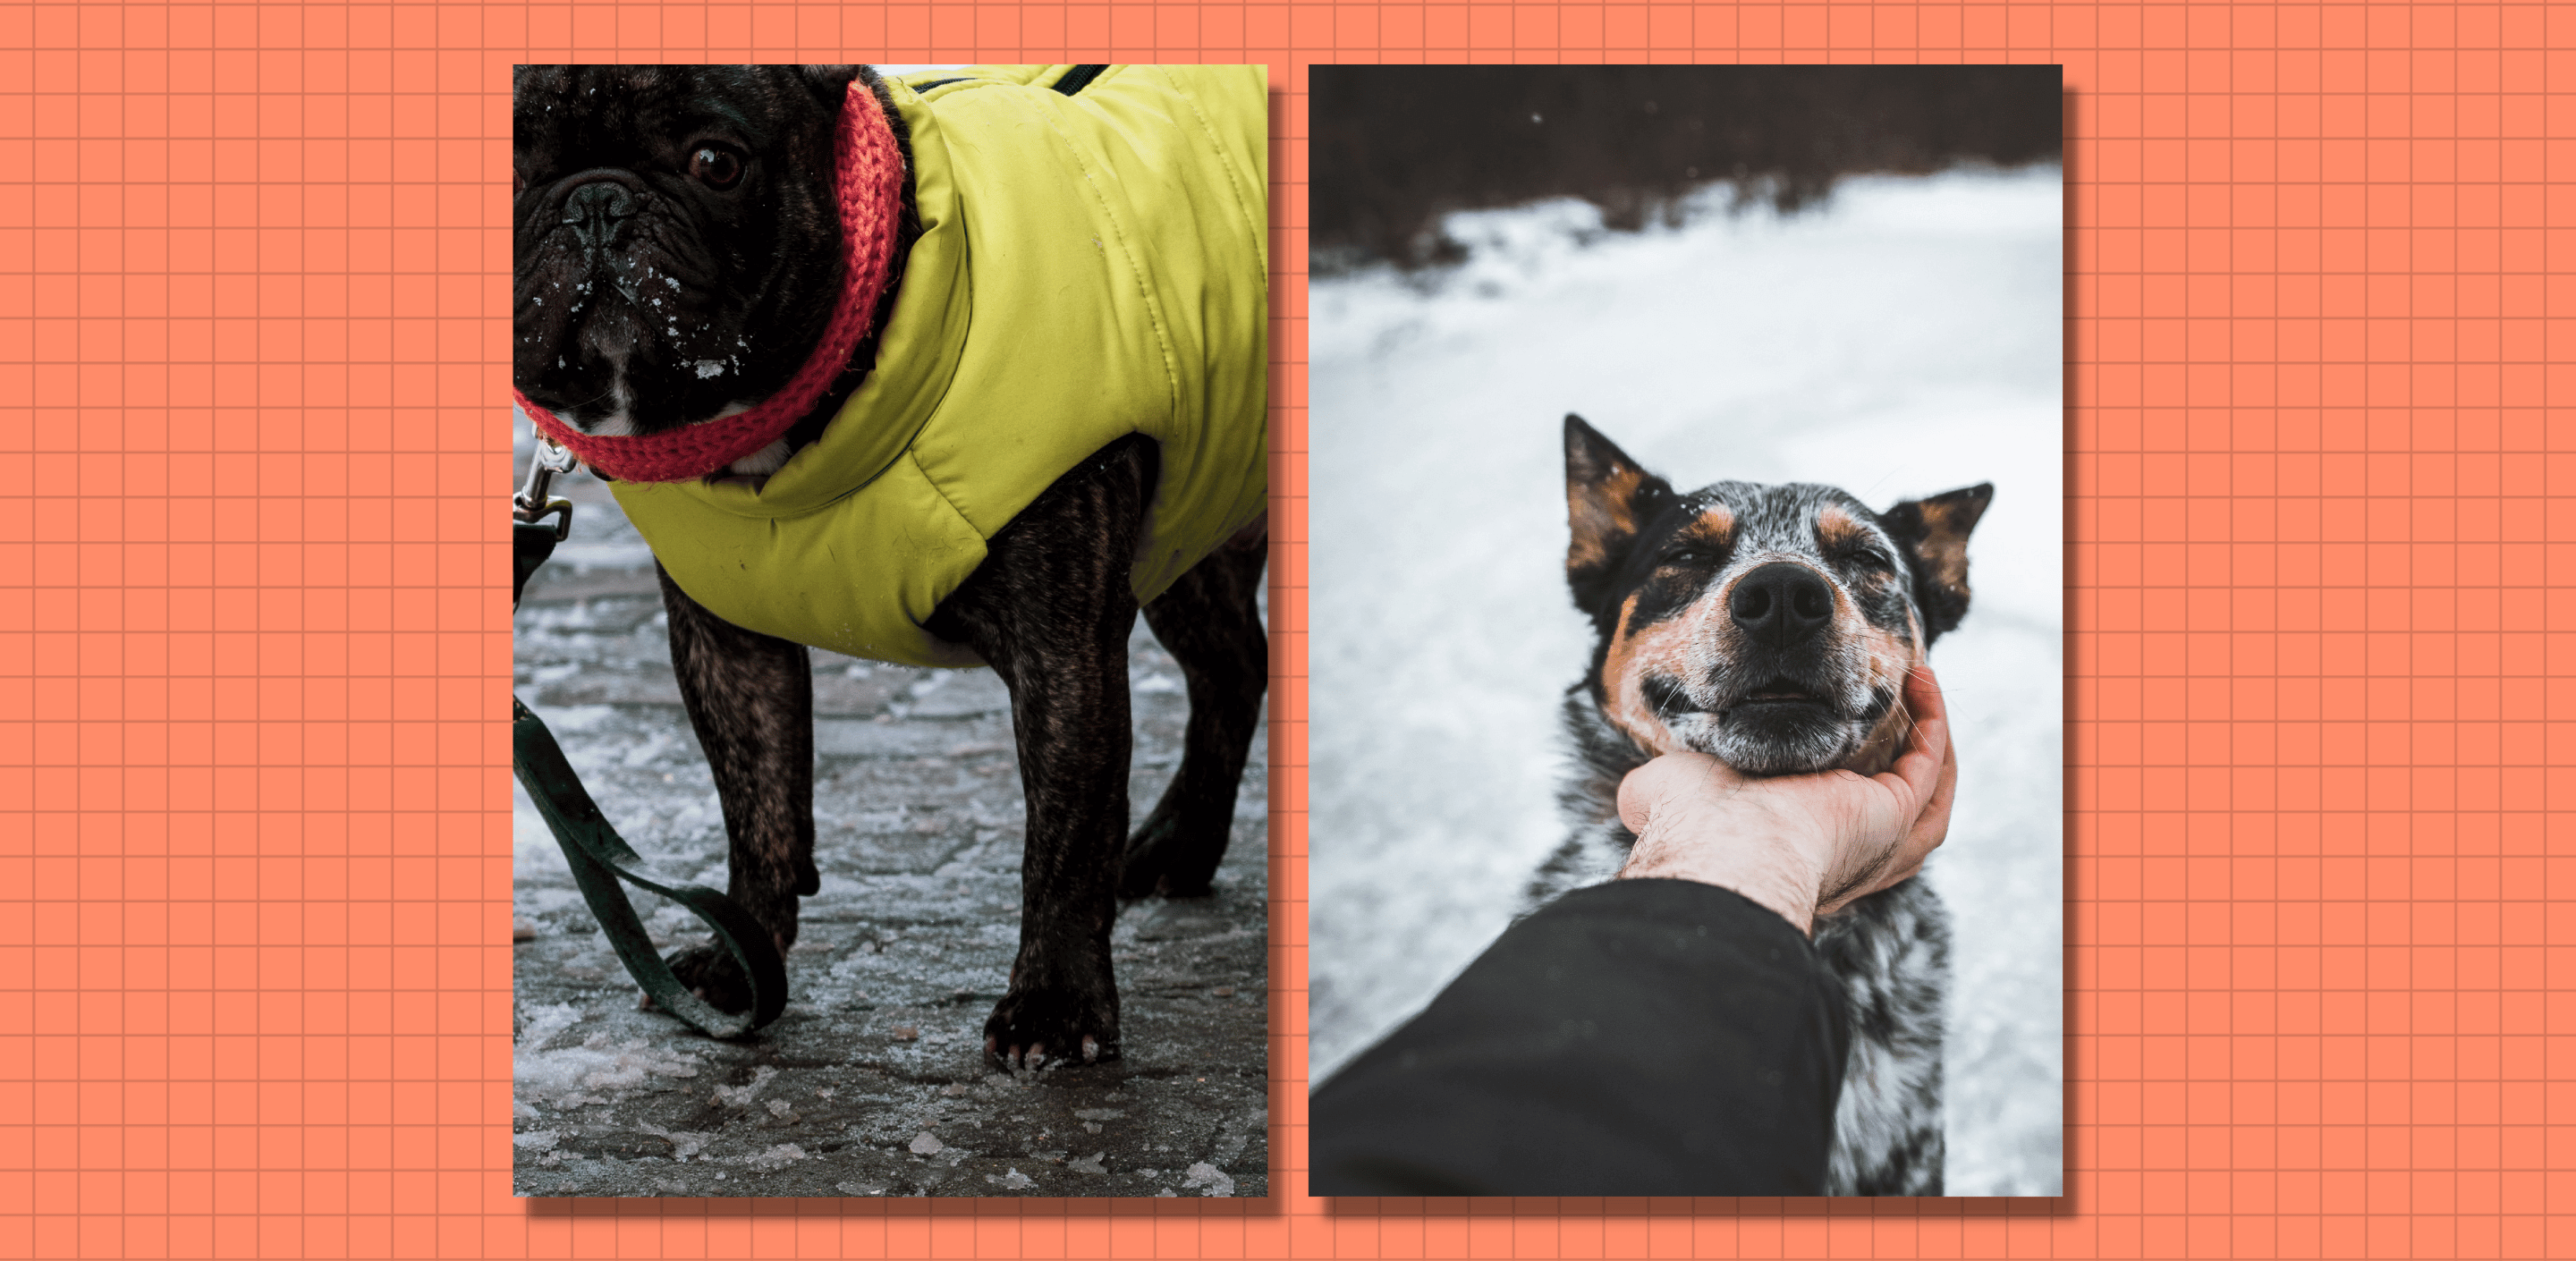 Is road salt bad for dog paws?